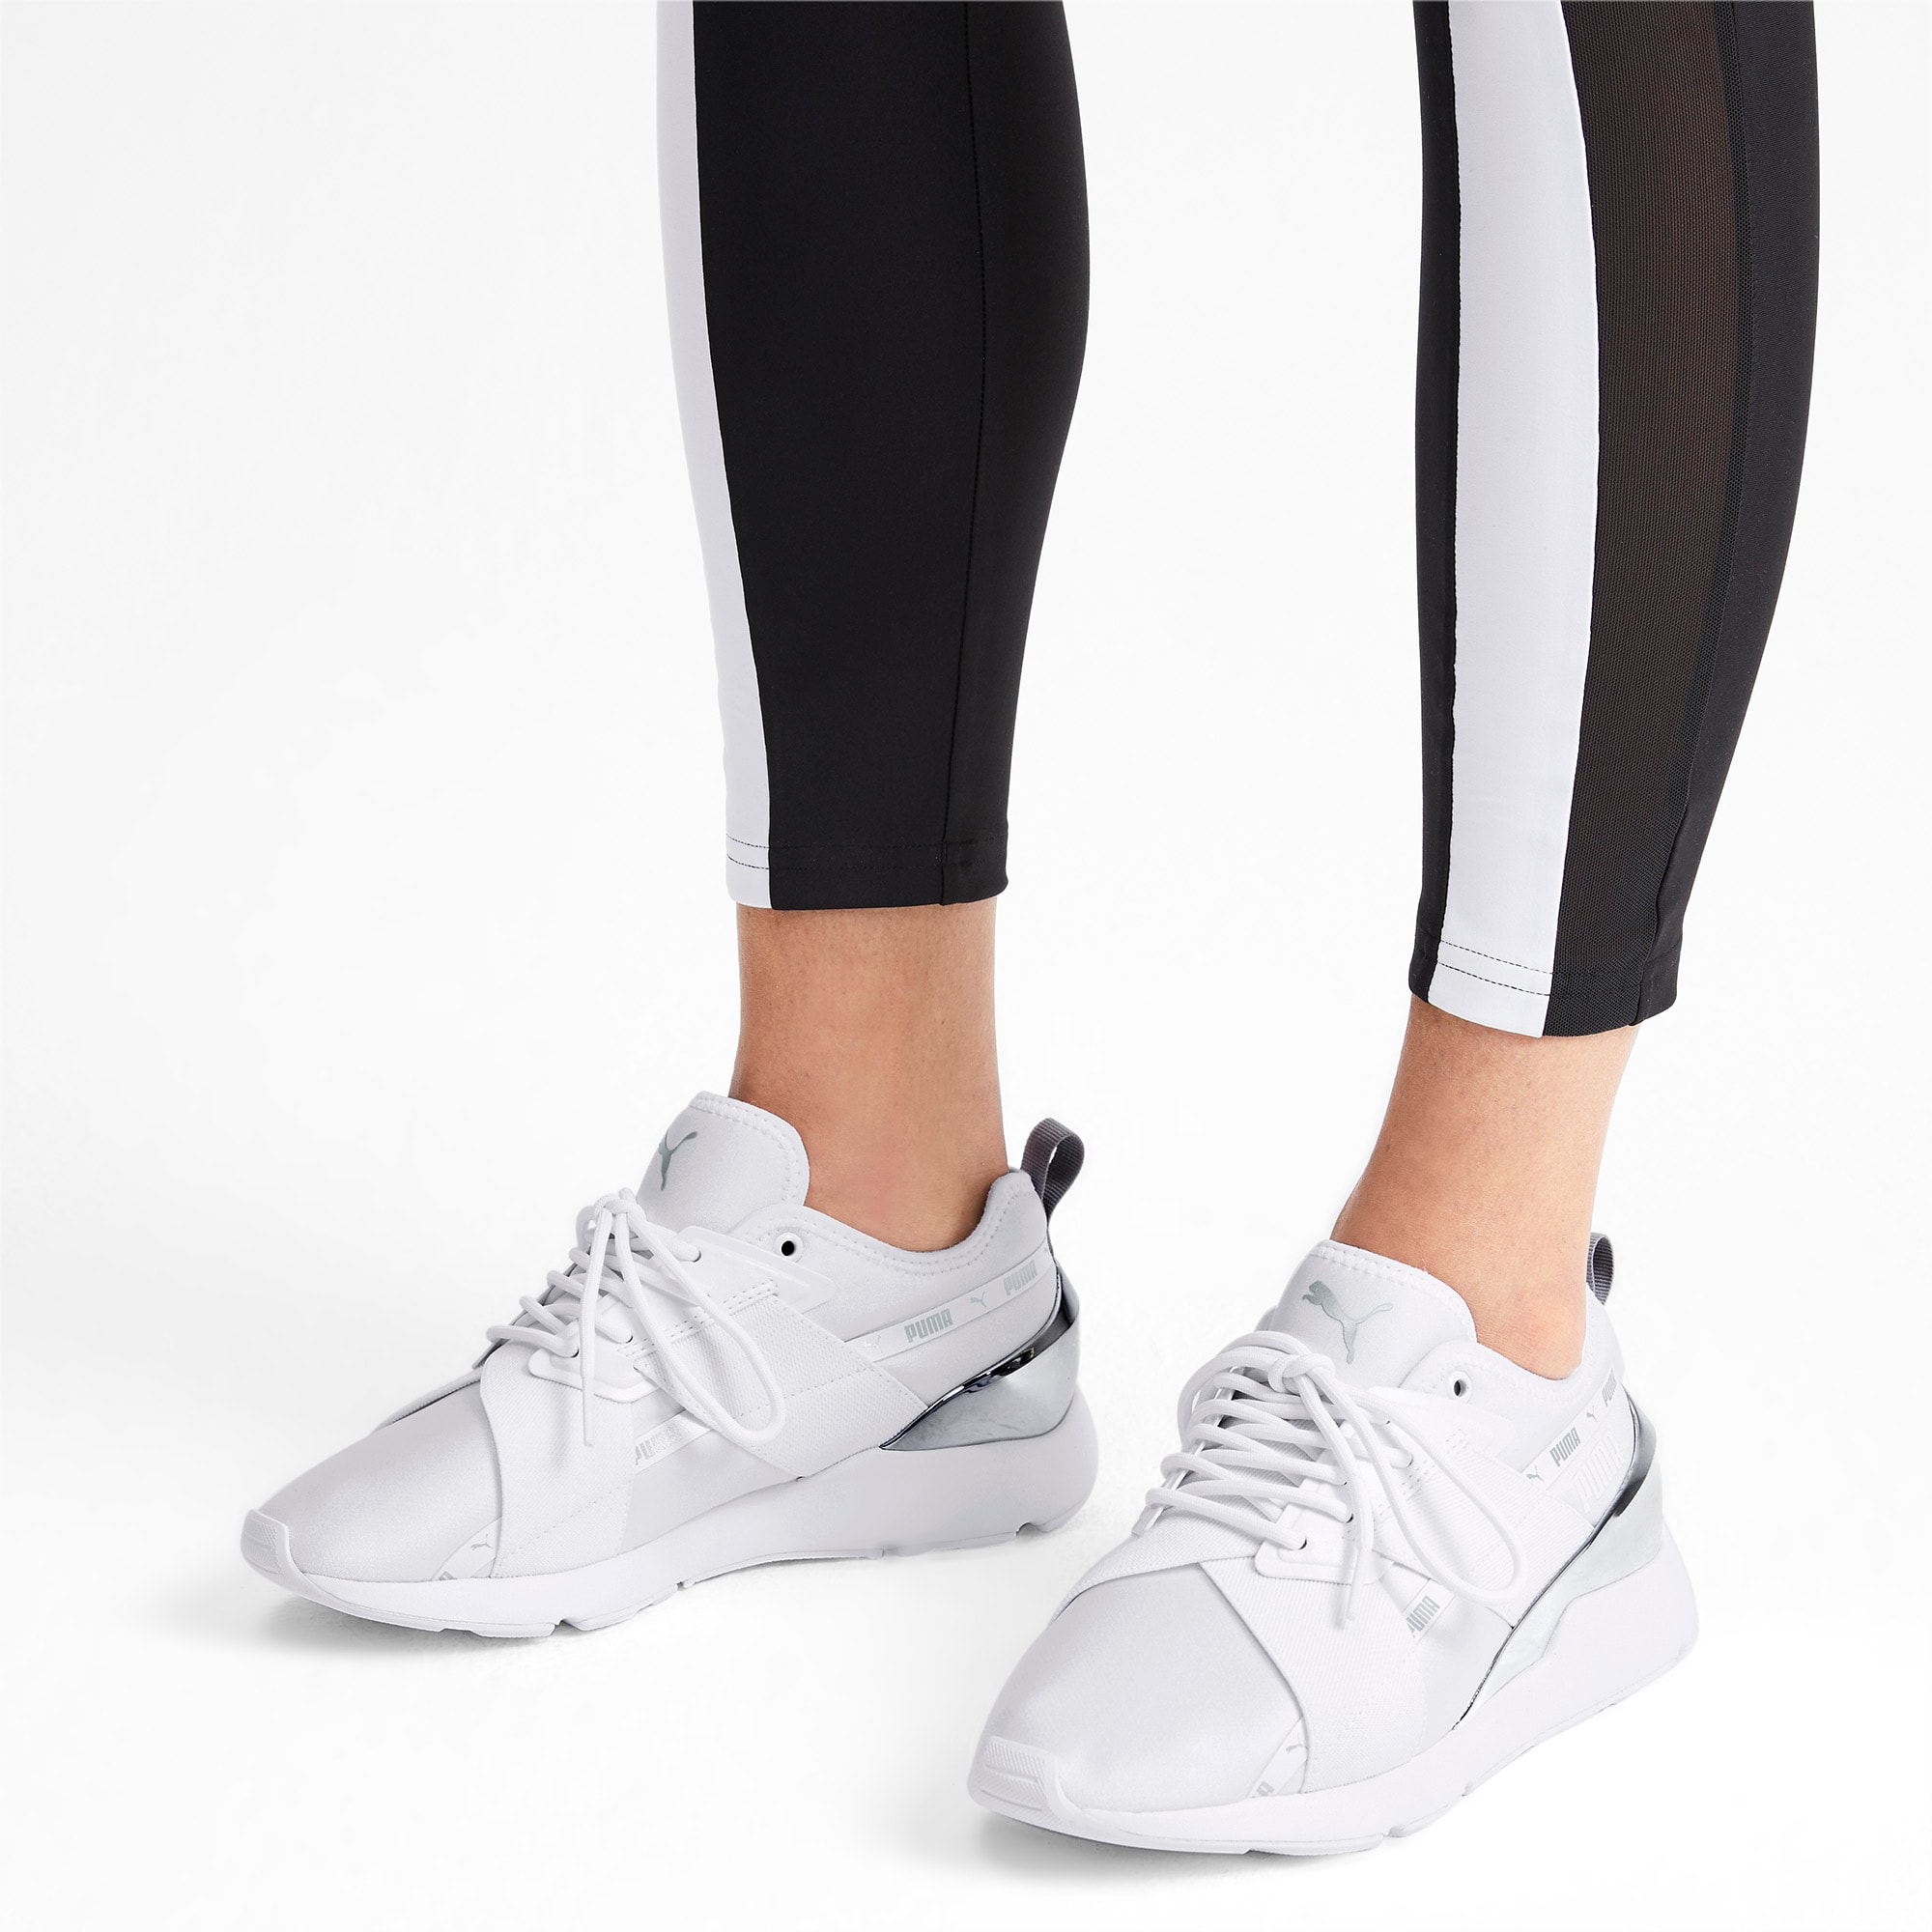 women's muse metallic casual sneakers from finish line